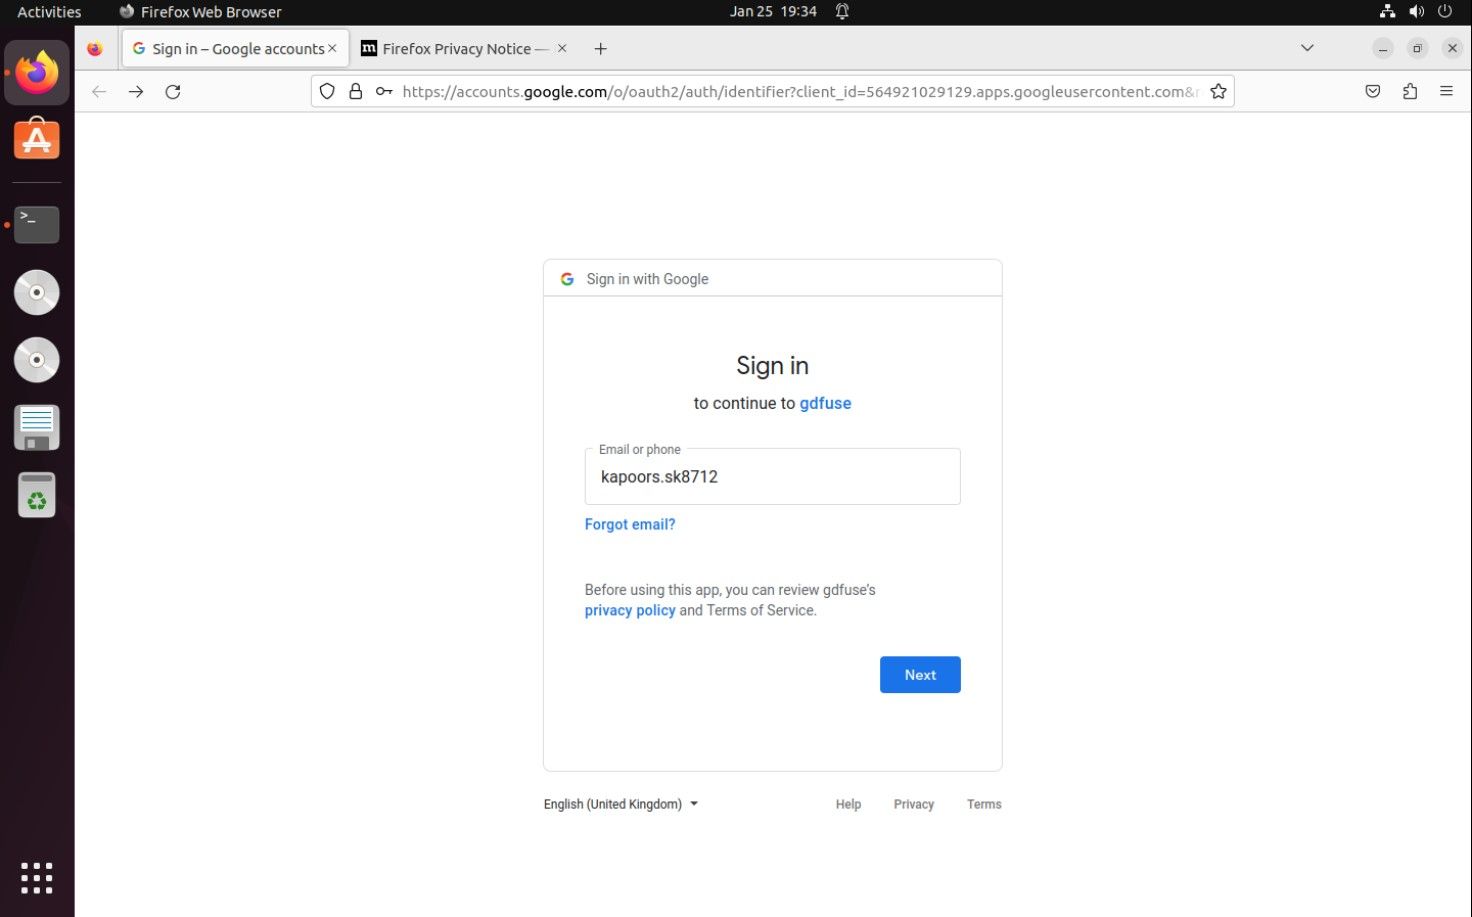 Gmail's sign-in screen requesting email address inputs